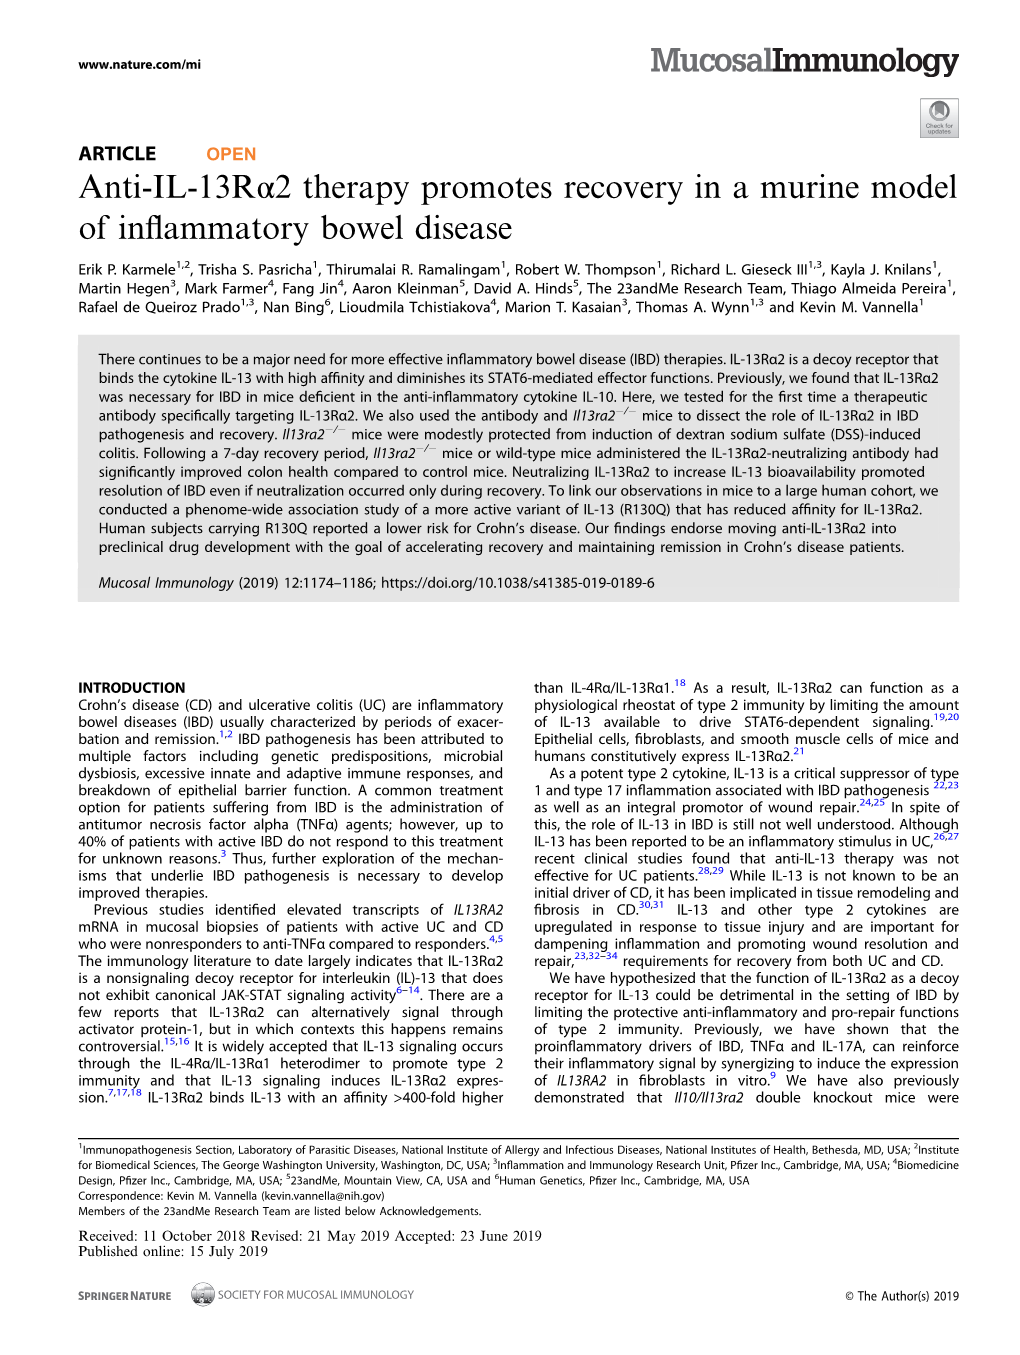 Anti-IL-13RÎ±2 Therapy Promotes Recovery in a Murine Model Of